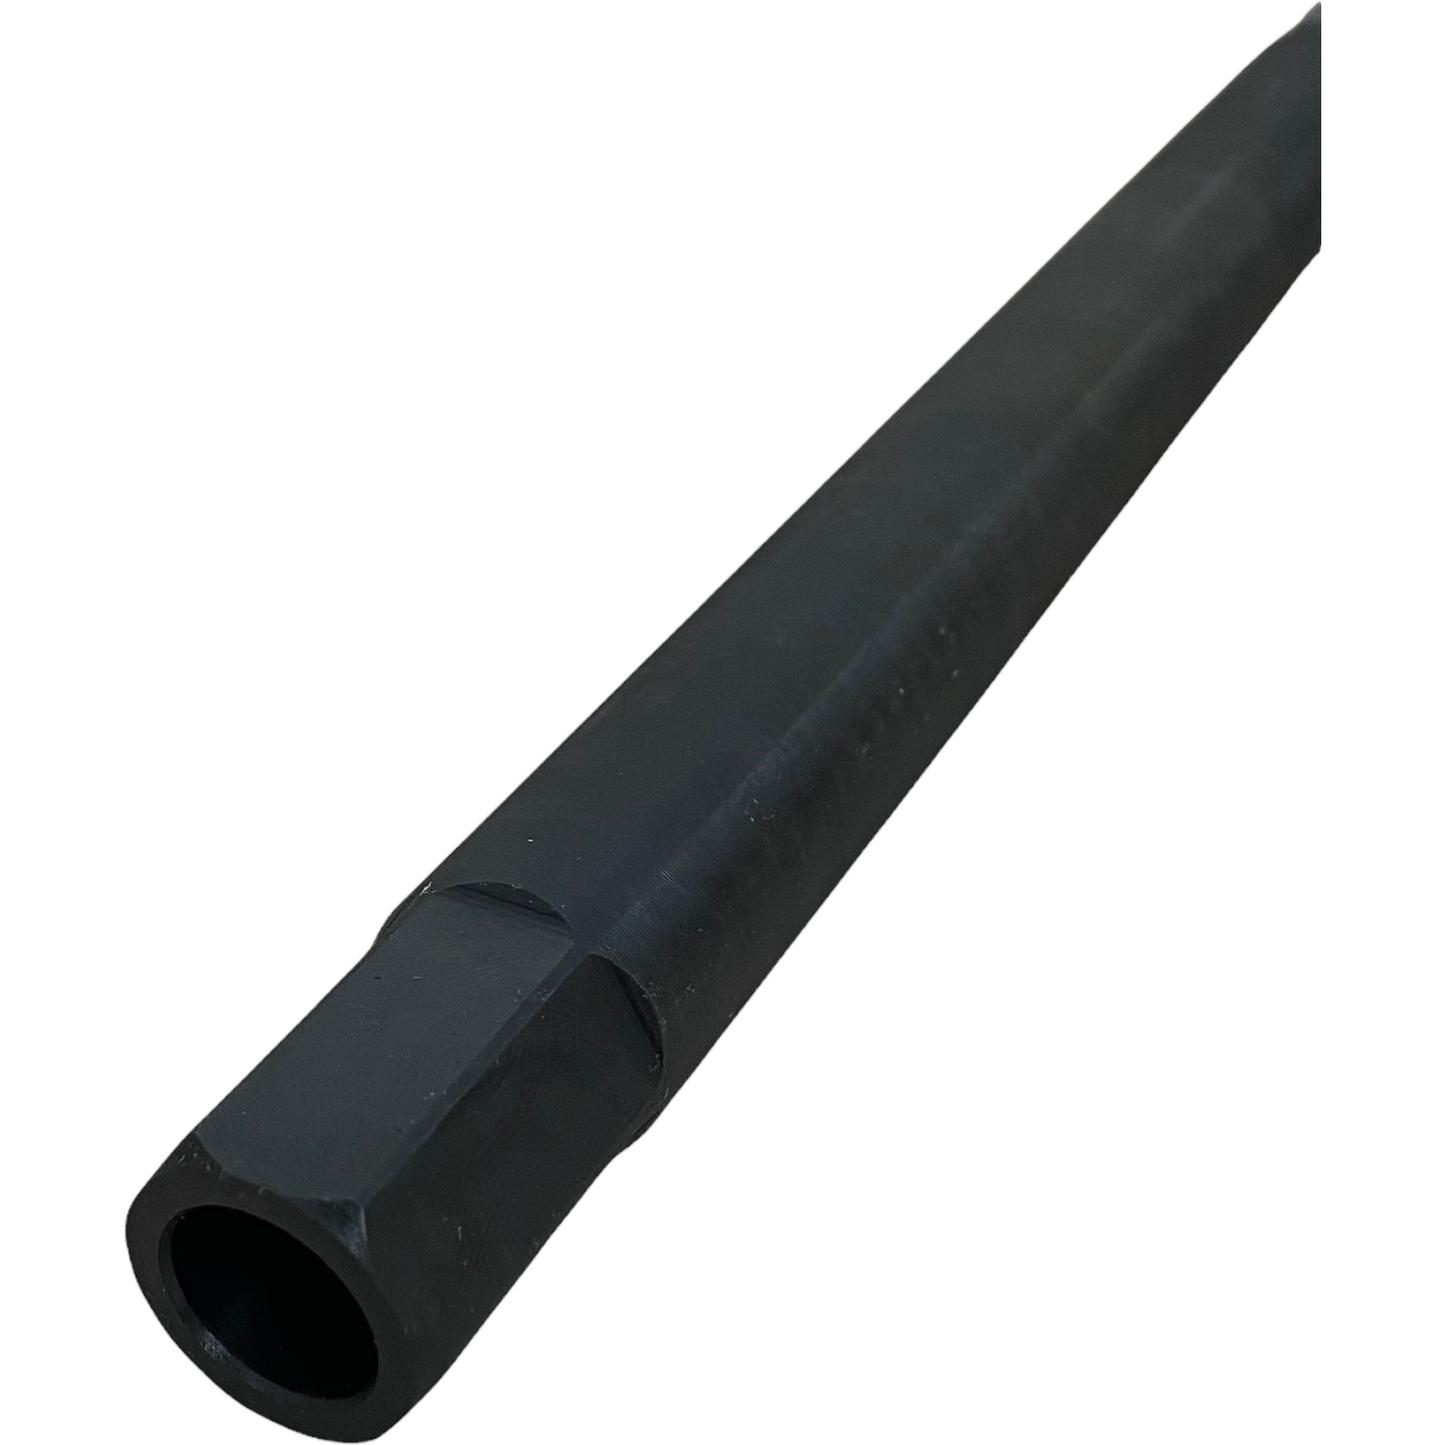 12” Core Drill Bit Extension 5/8” - 11 Male to 5/8” - 11 Female - 5/8"-11 12" Length